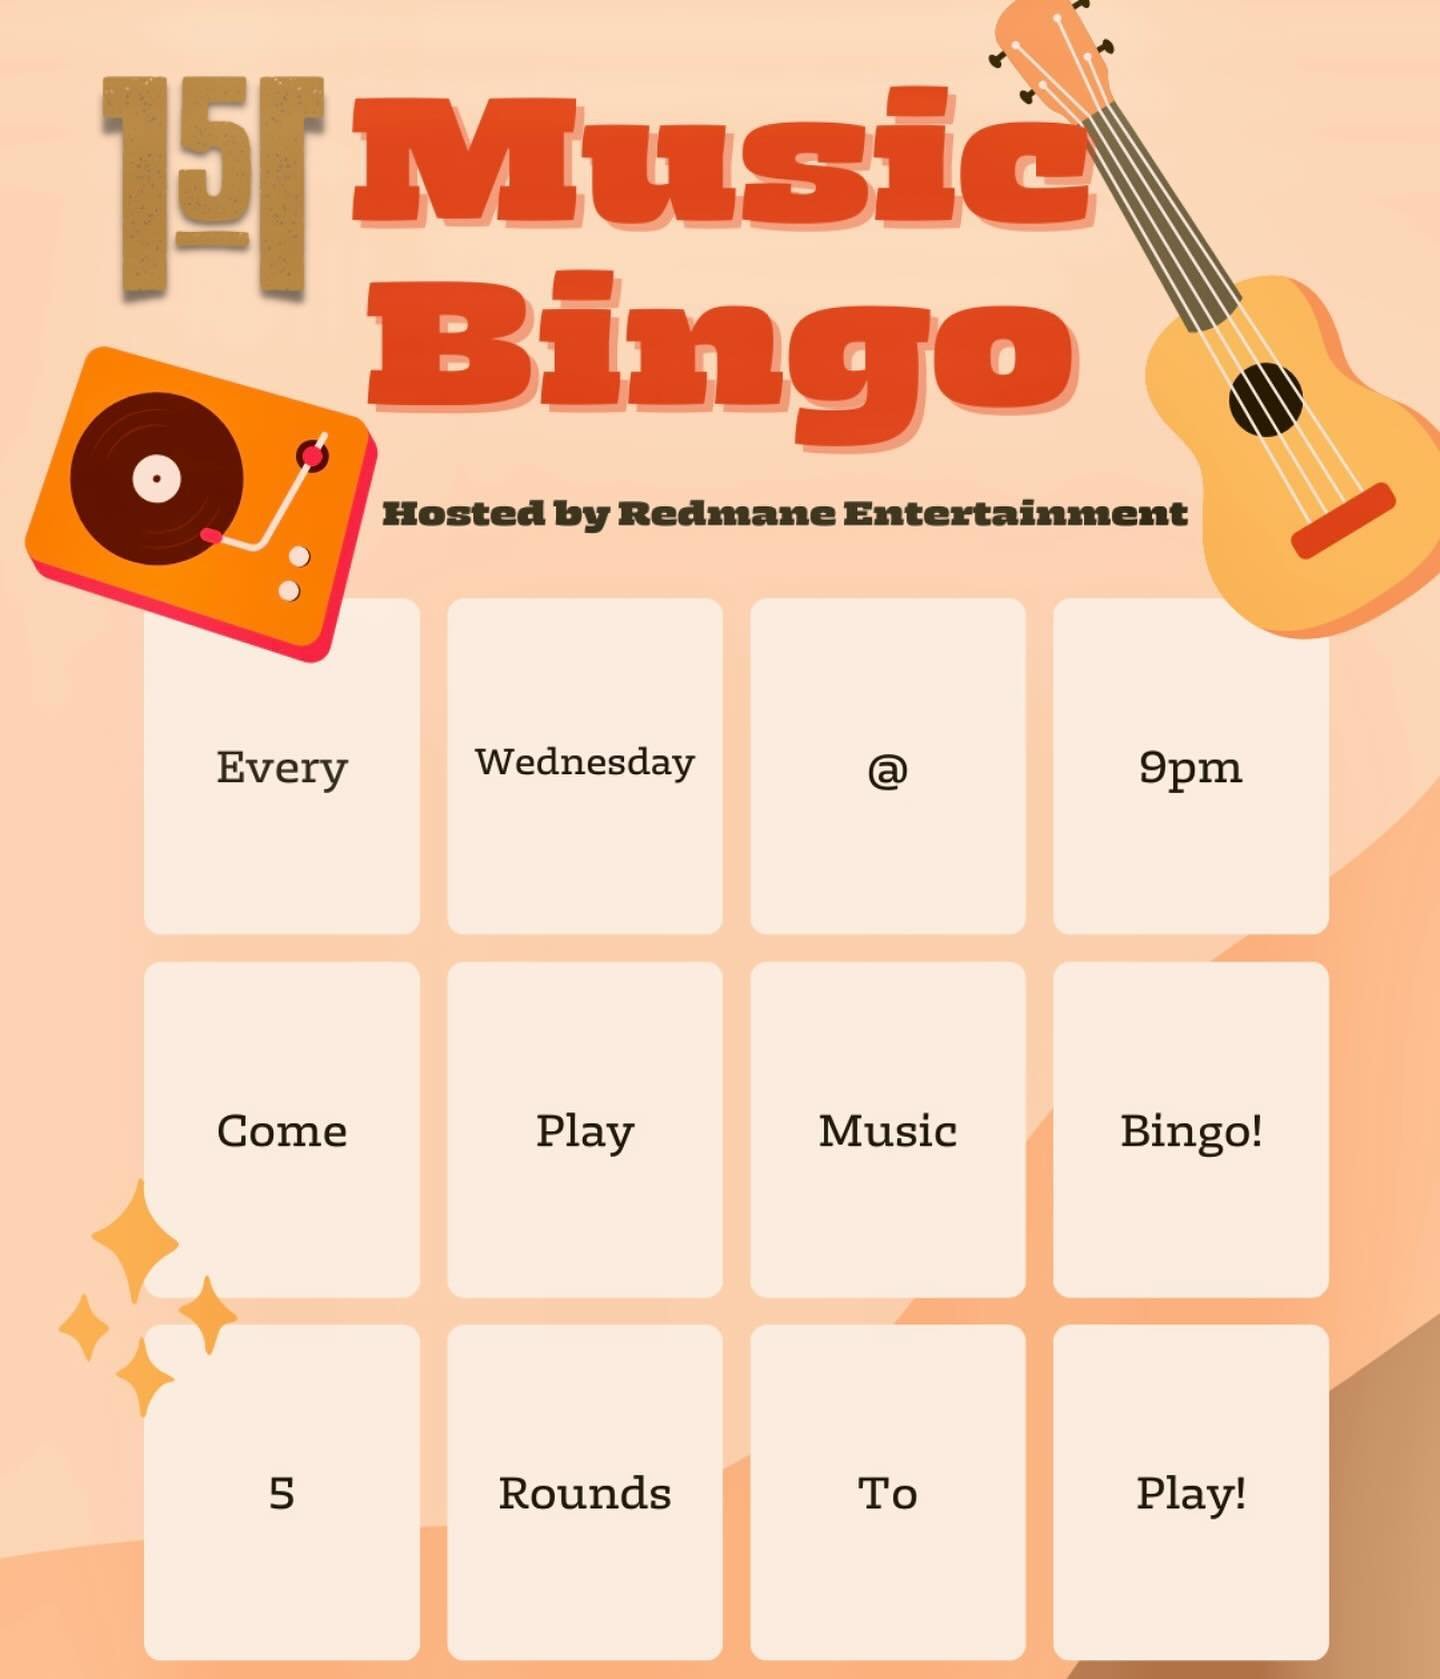 Weekly Music Bingo starts up at 9pm 🎵 5 chances to win a gift card! 🌮 1/2 price tacos, taco salads &amp; quesadillas ALL DAY! #westchesterpa #downtownwestchesterpa #wcupa #wcuofpa #westchesterborough #westchesteruniversity #saloon151 #westchester #